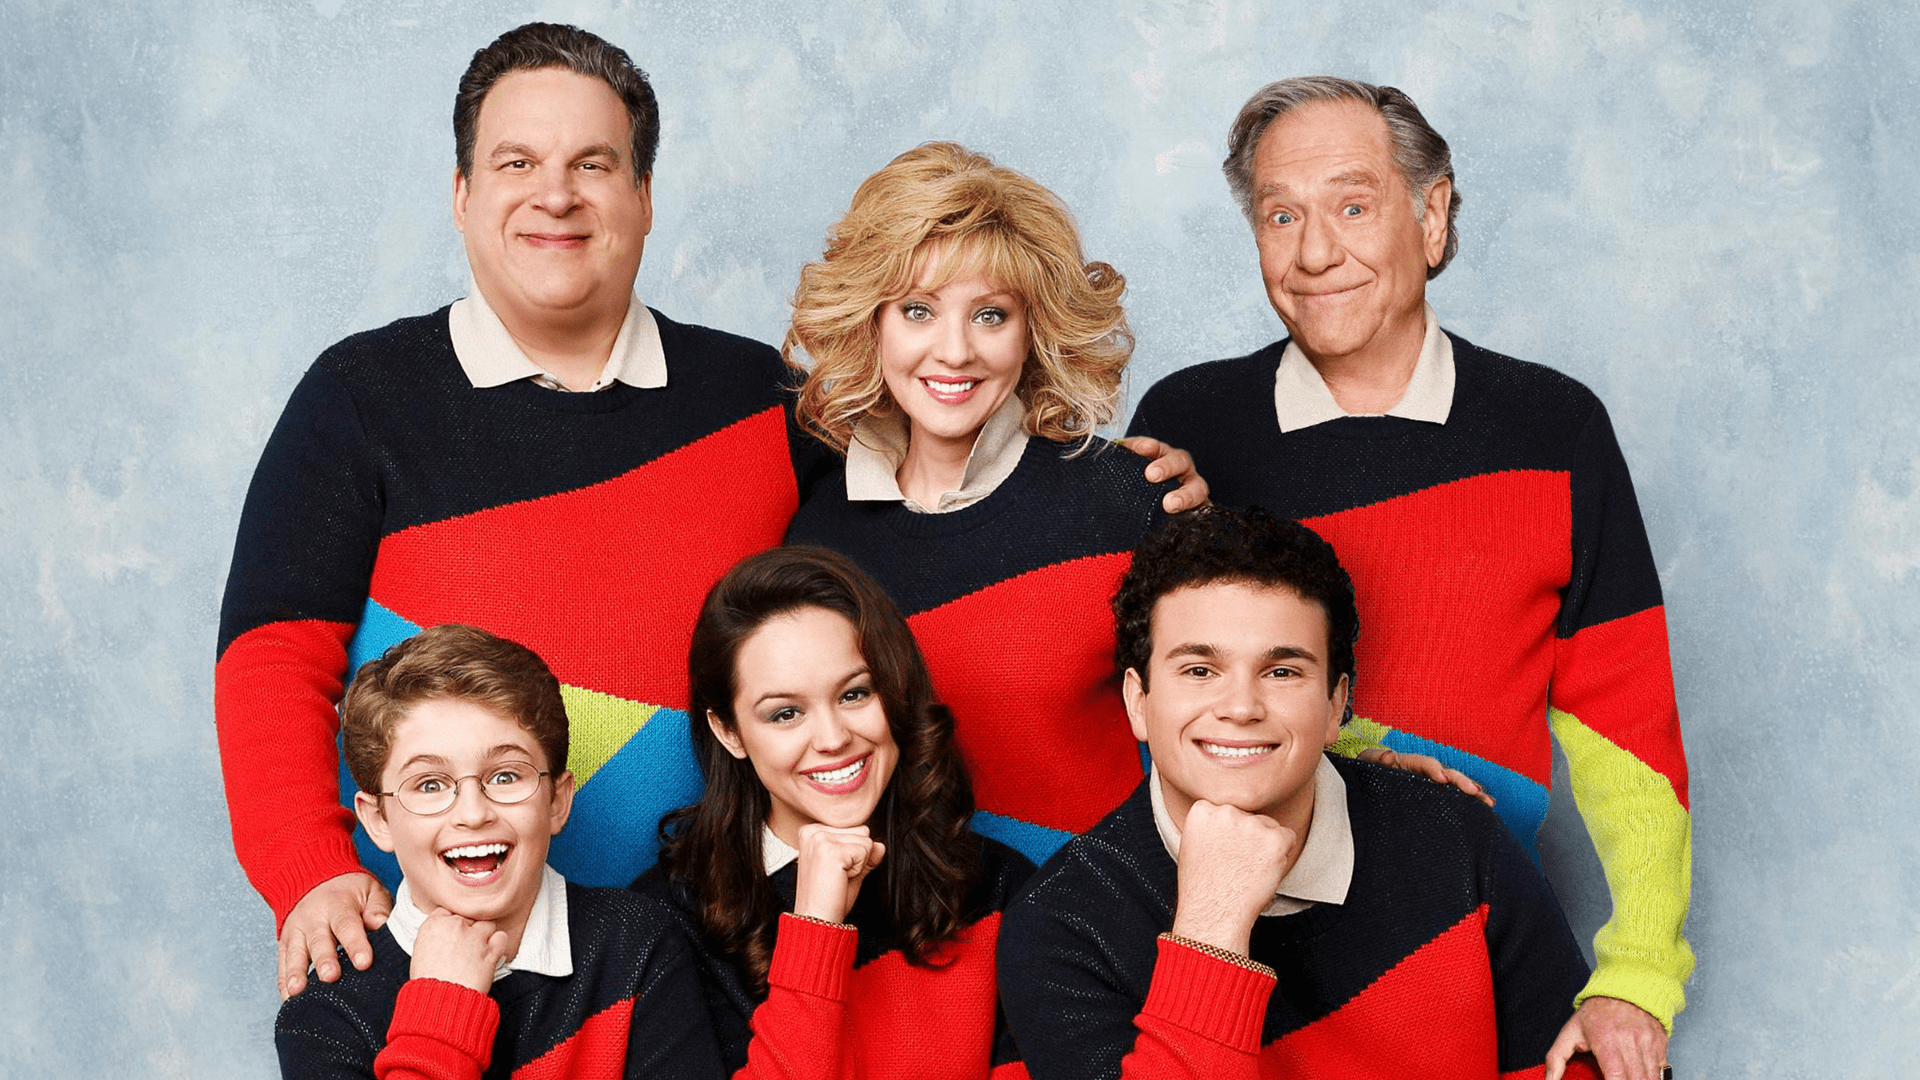 The Goldbergs Facts - 34 Little Known Facts About The Goldbergs That You Haven’t Read Before